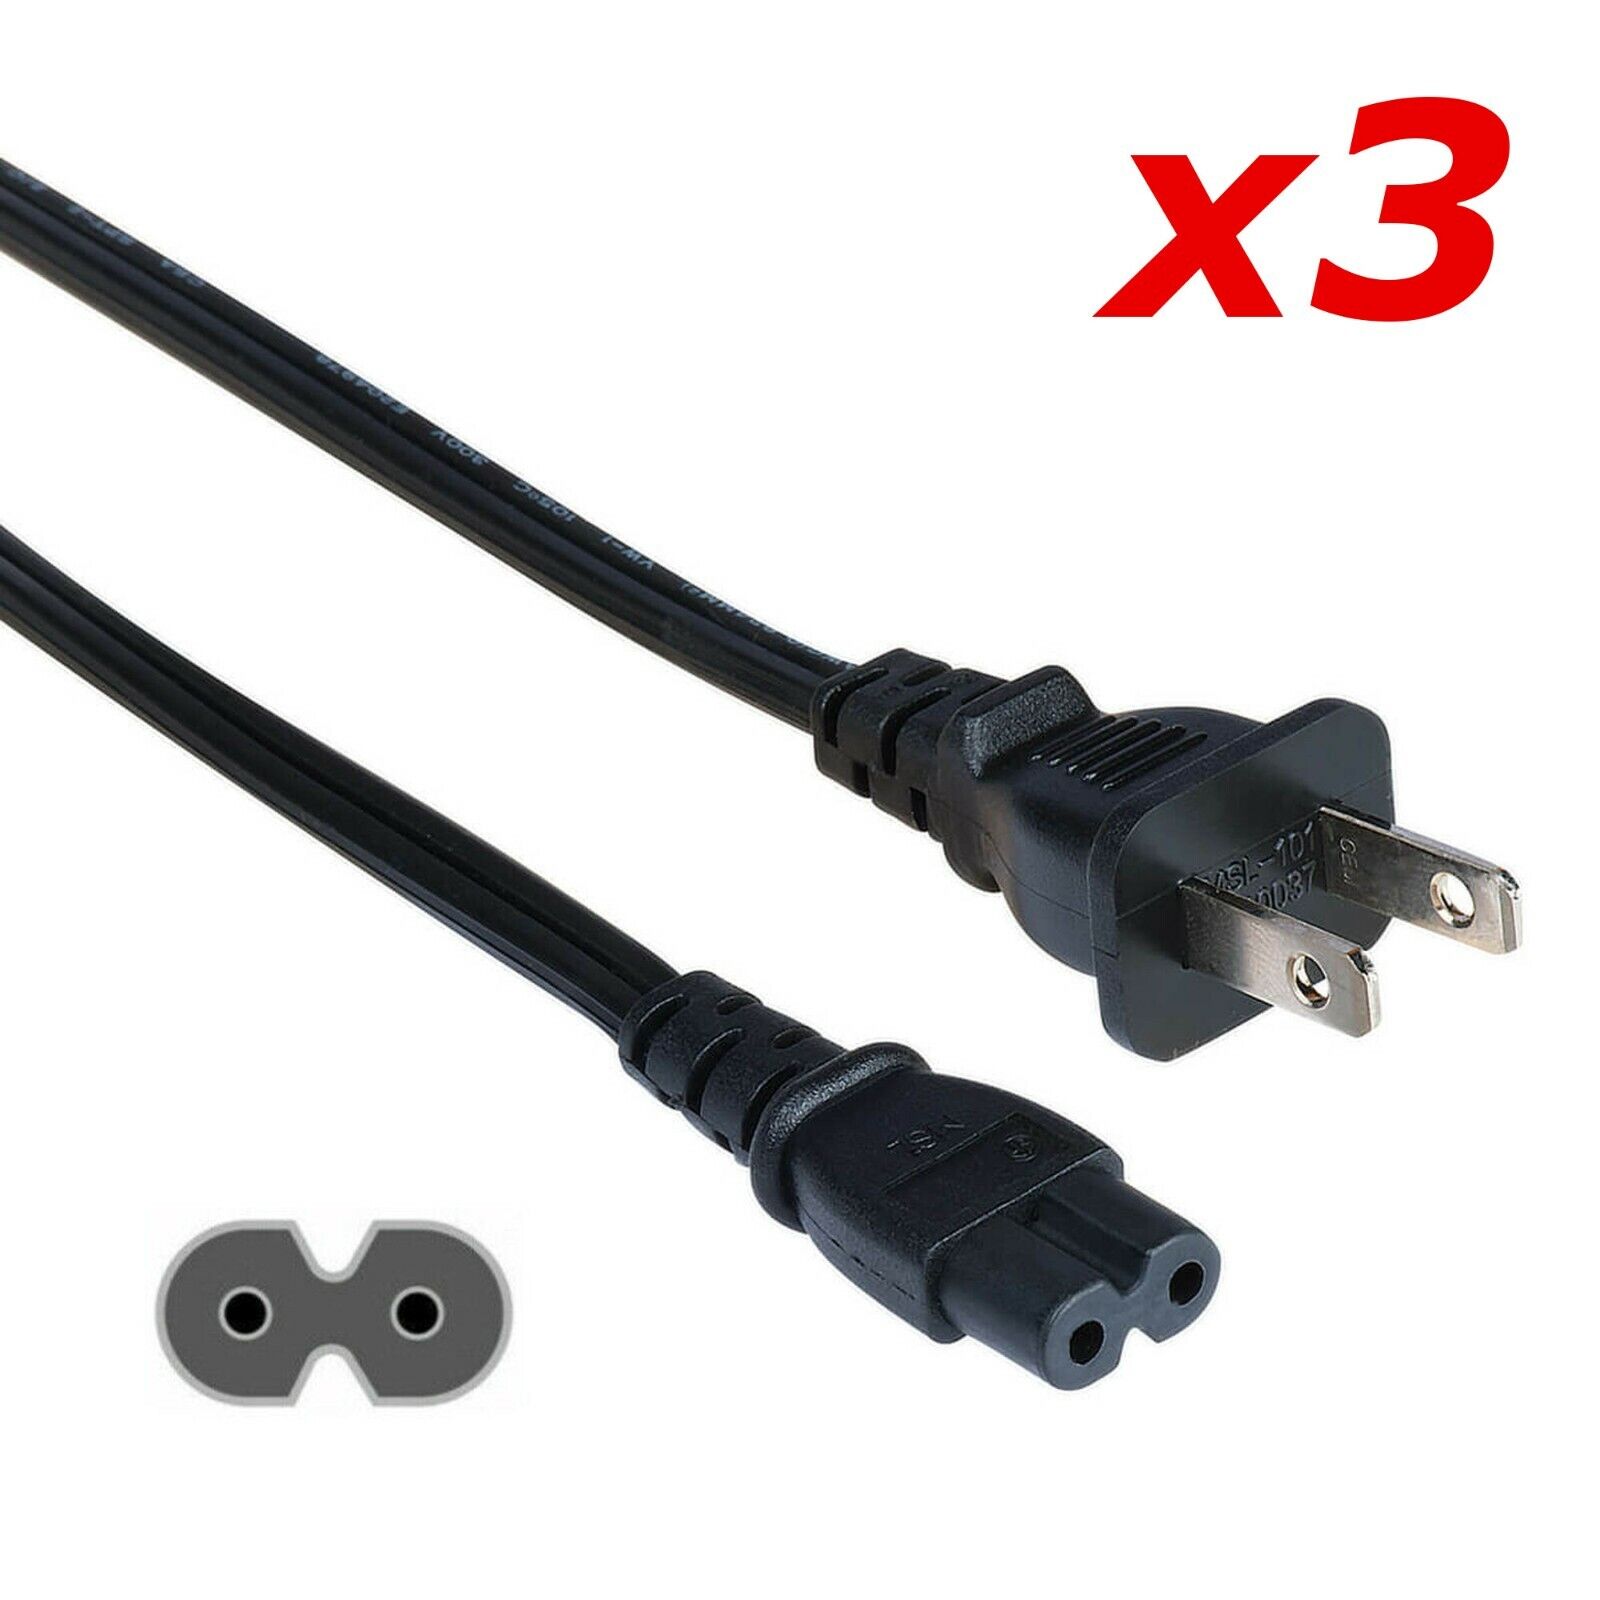 3 Pack - 6ft Two Prong AC Power Cord Cable NEMA 1-15P C7 for Laptop PS3 PS4 DVR